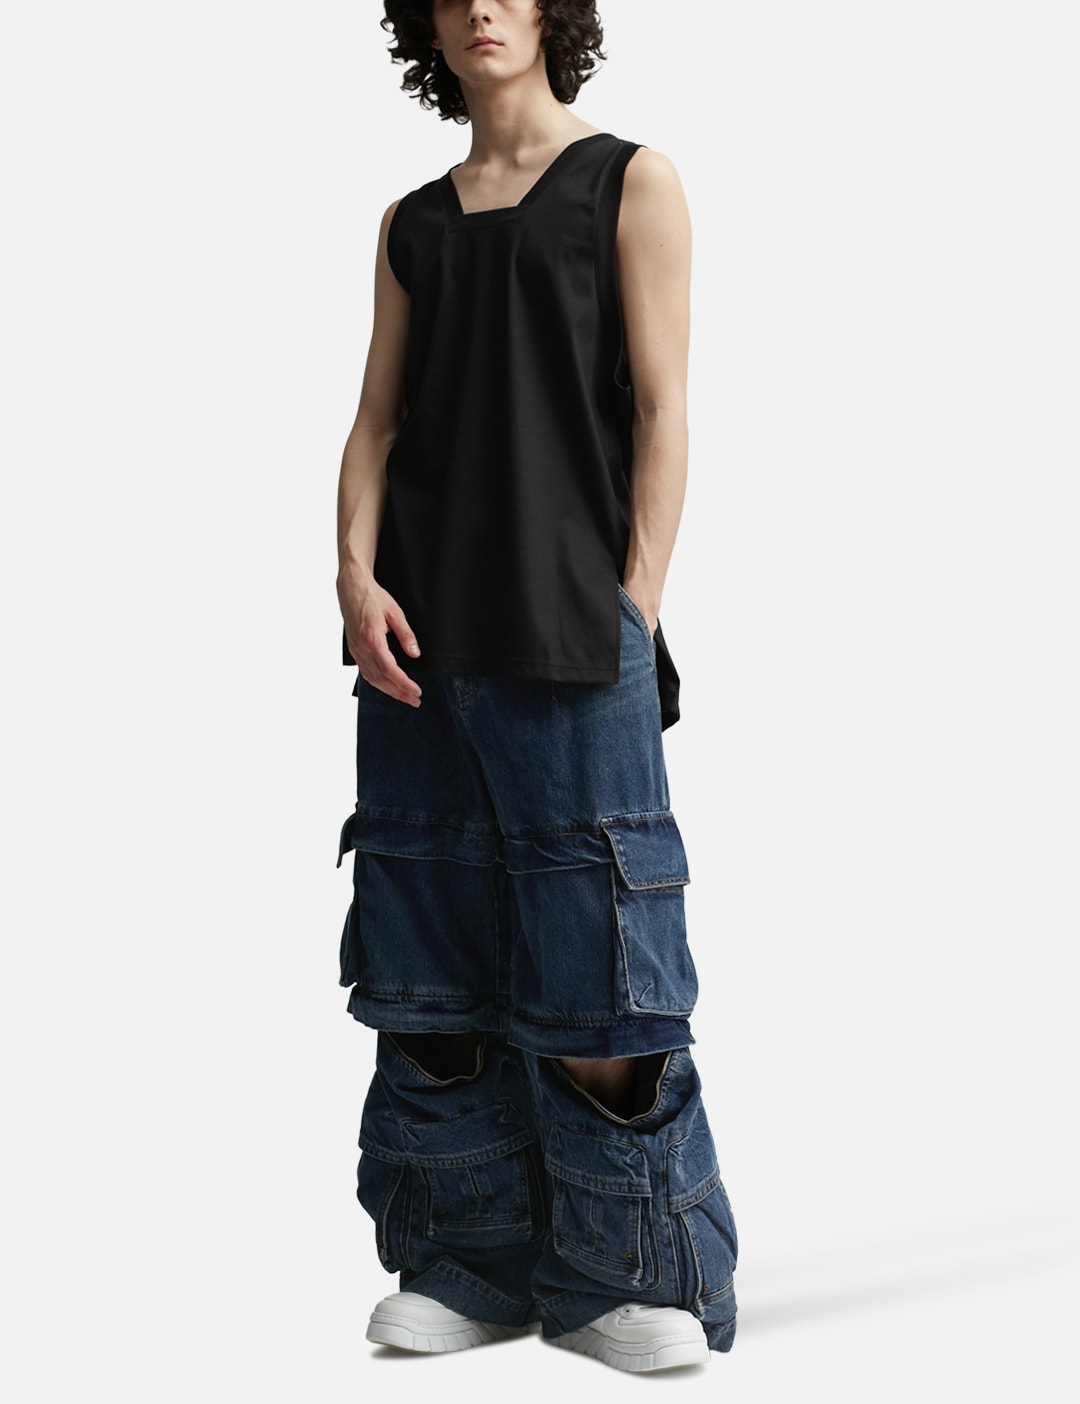 AFB - VINTAGE FLARE PANTS  HBX - Globally Curated Fashion and